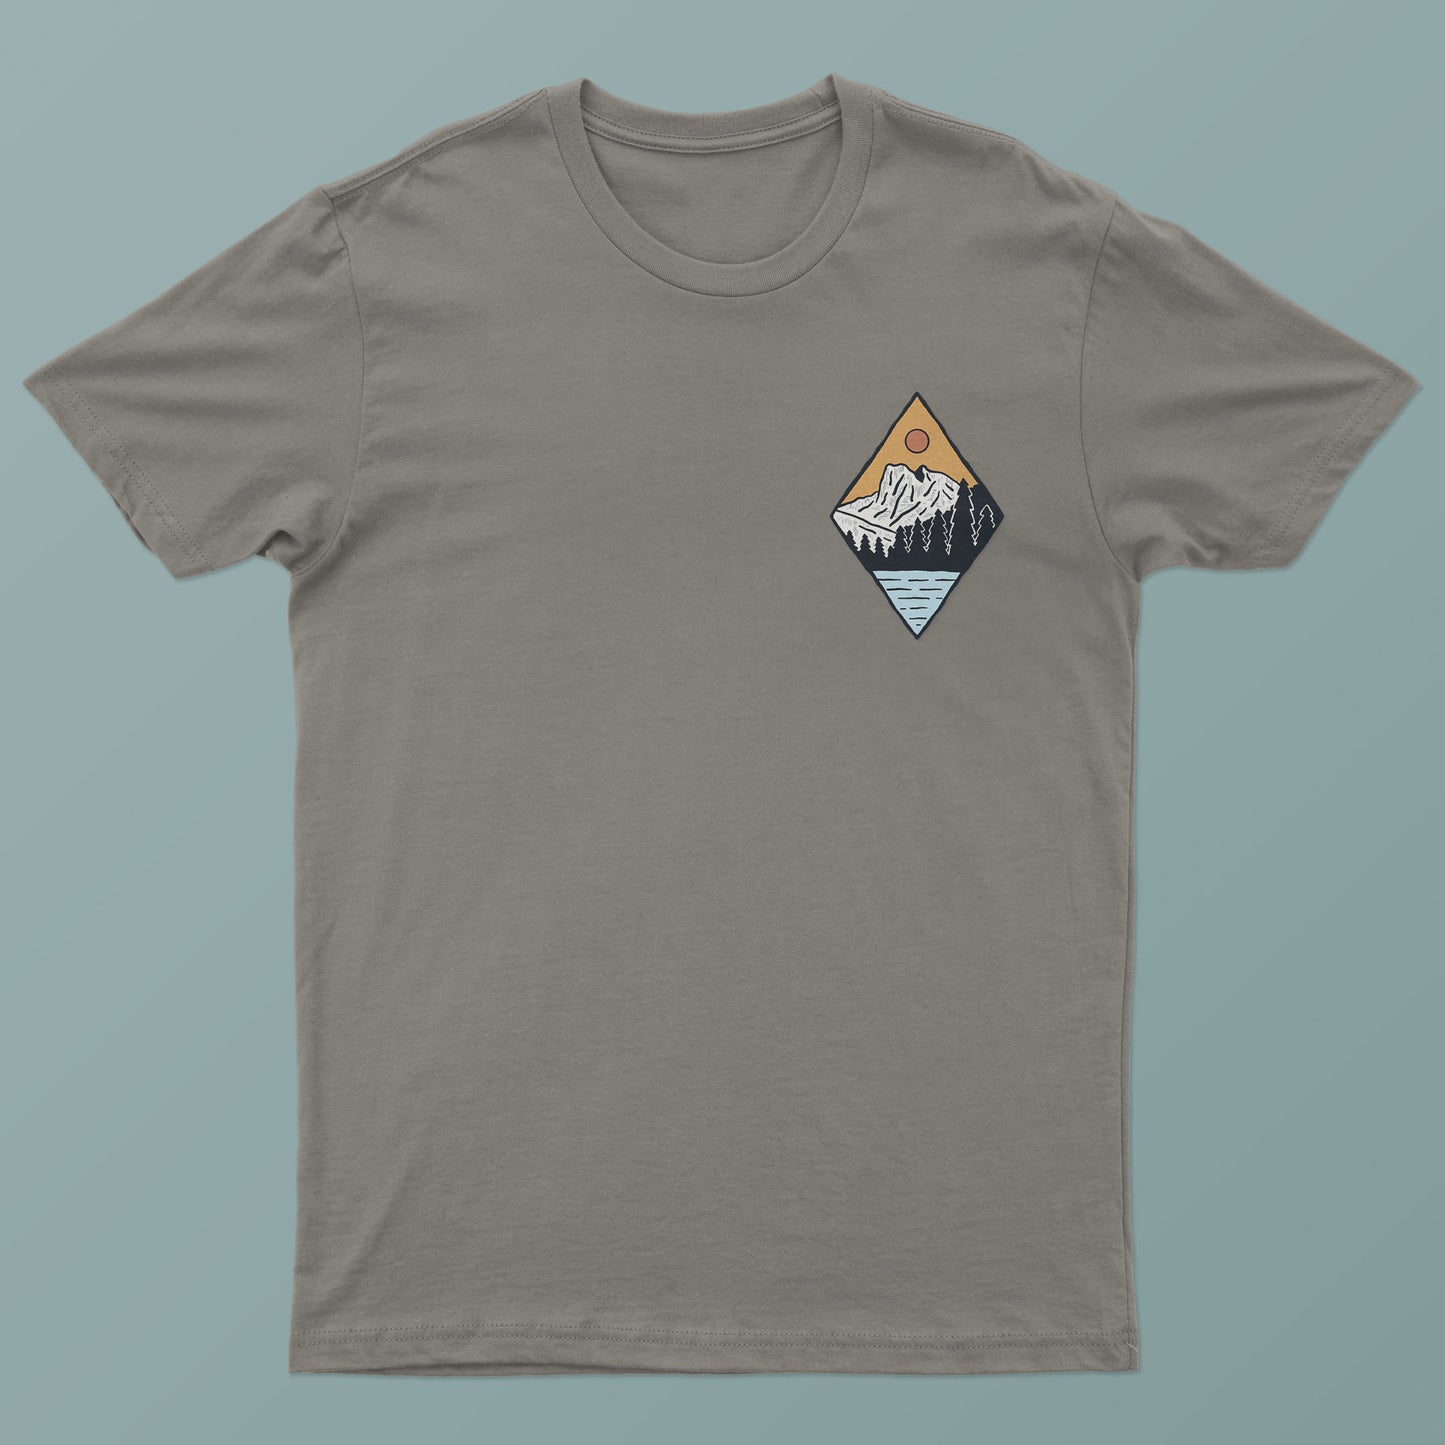 Wilderness Explorer Graphic Tee - S-XXXL, Multiple Colors, Free Shipping